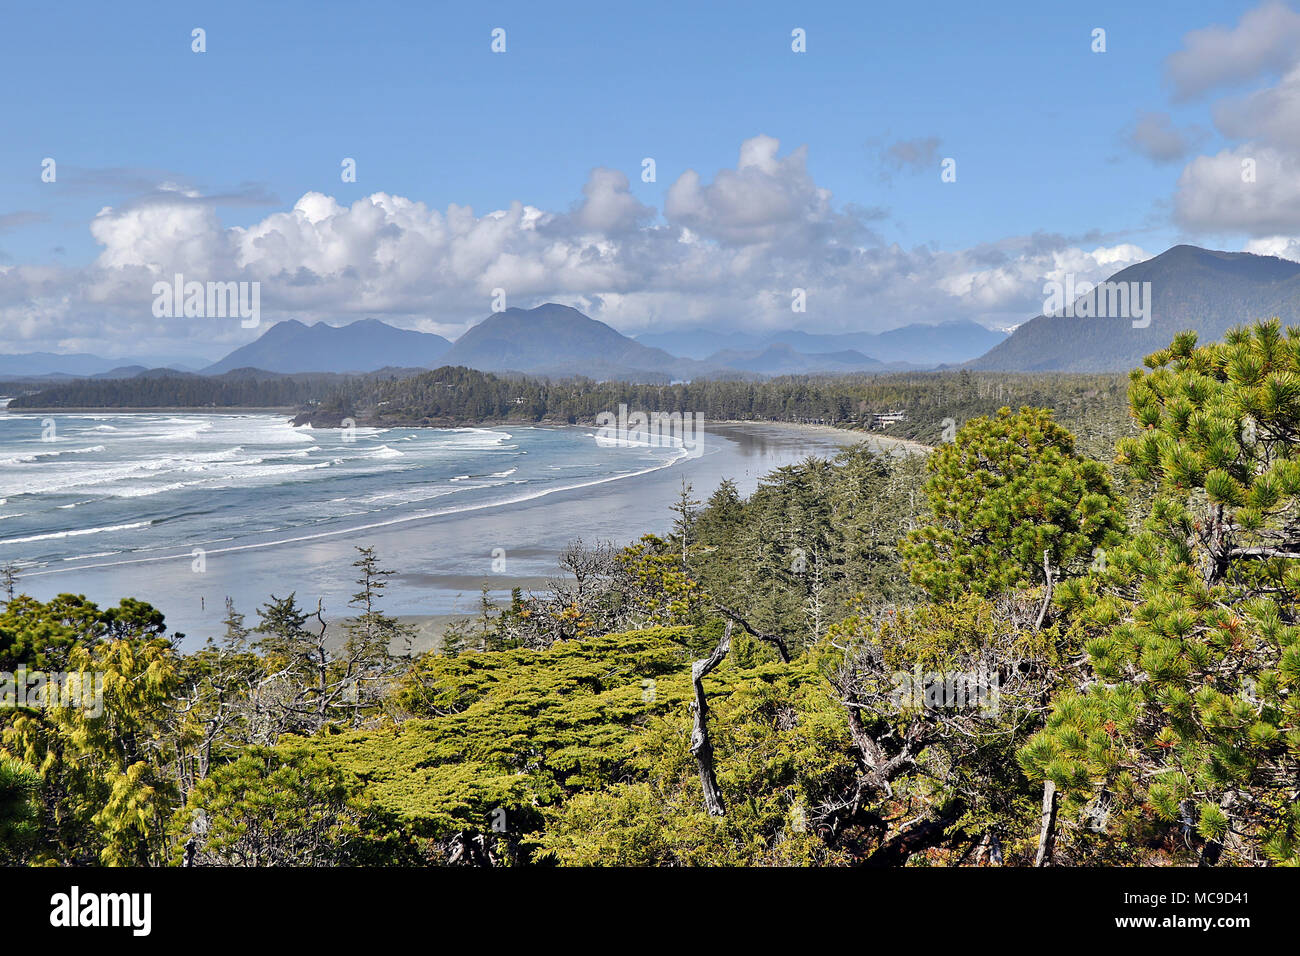 Surfing beach at Cox Bay in Tofino, on the West Coast of Vancouver Island, British Columbia in Canada. Stock Photo